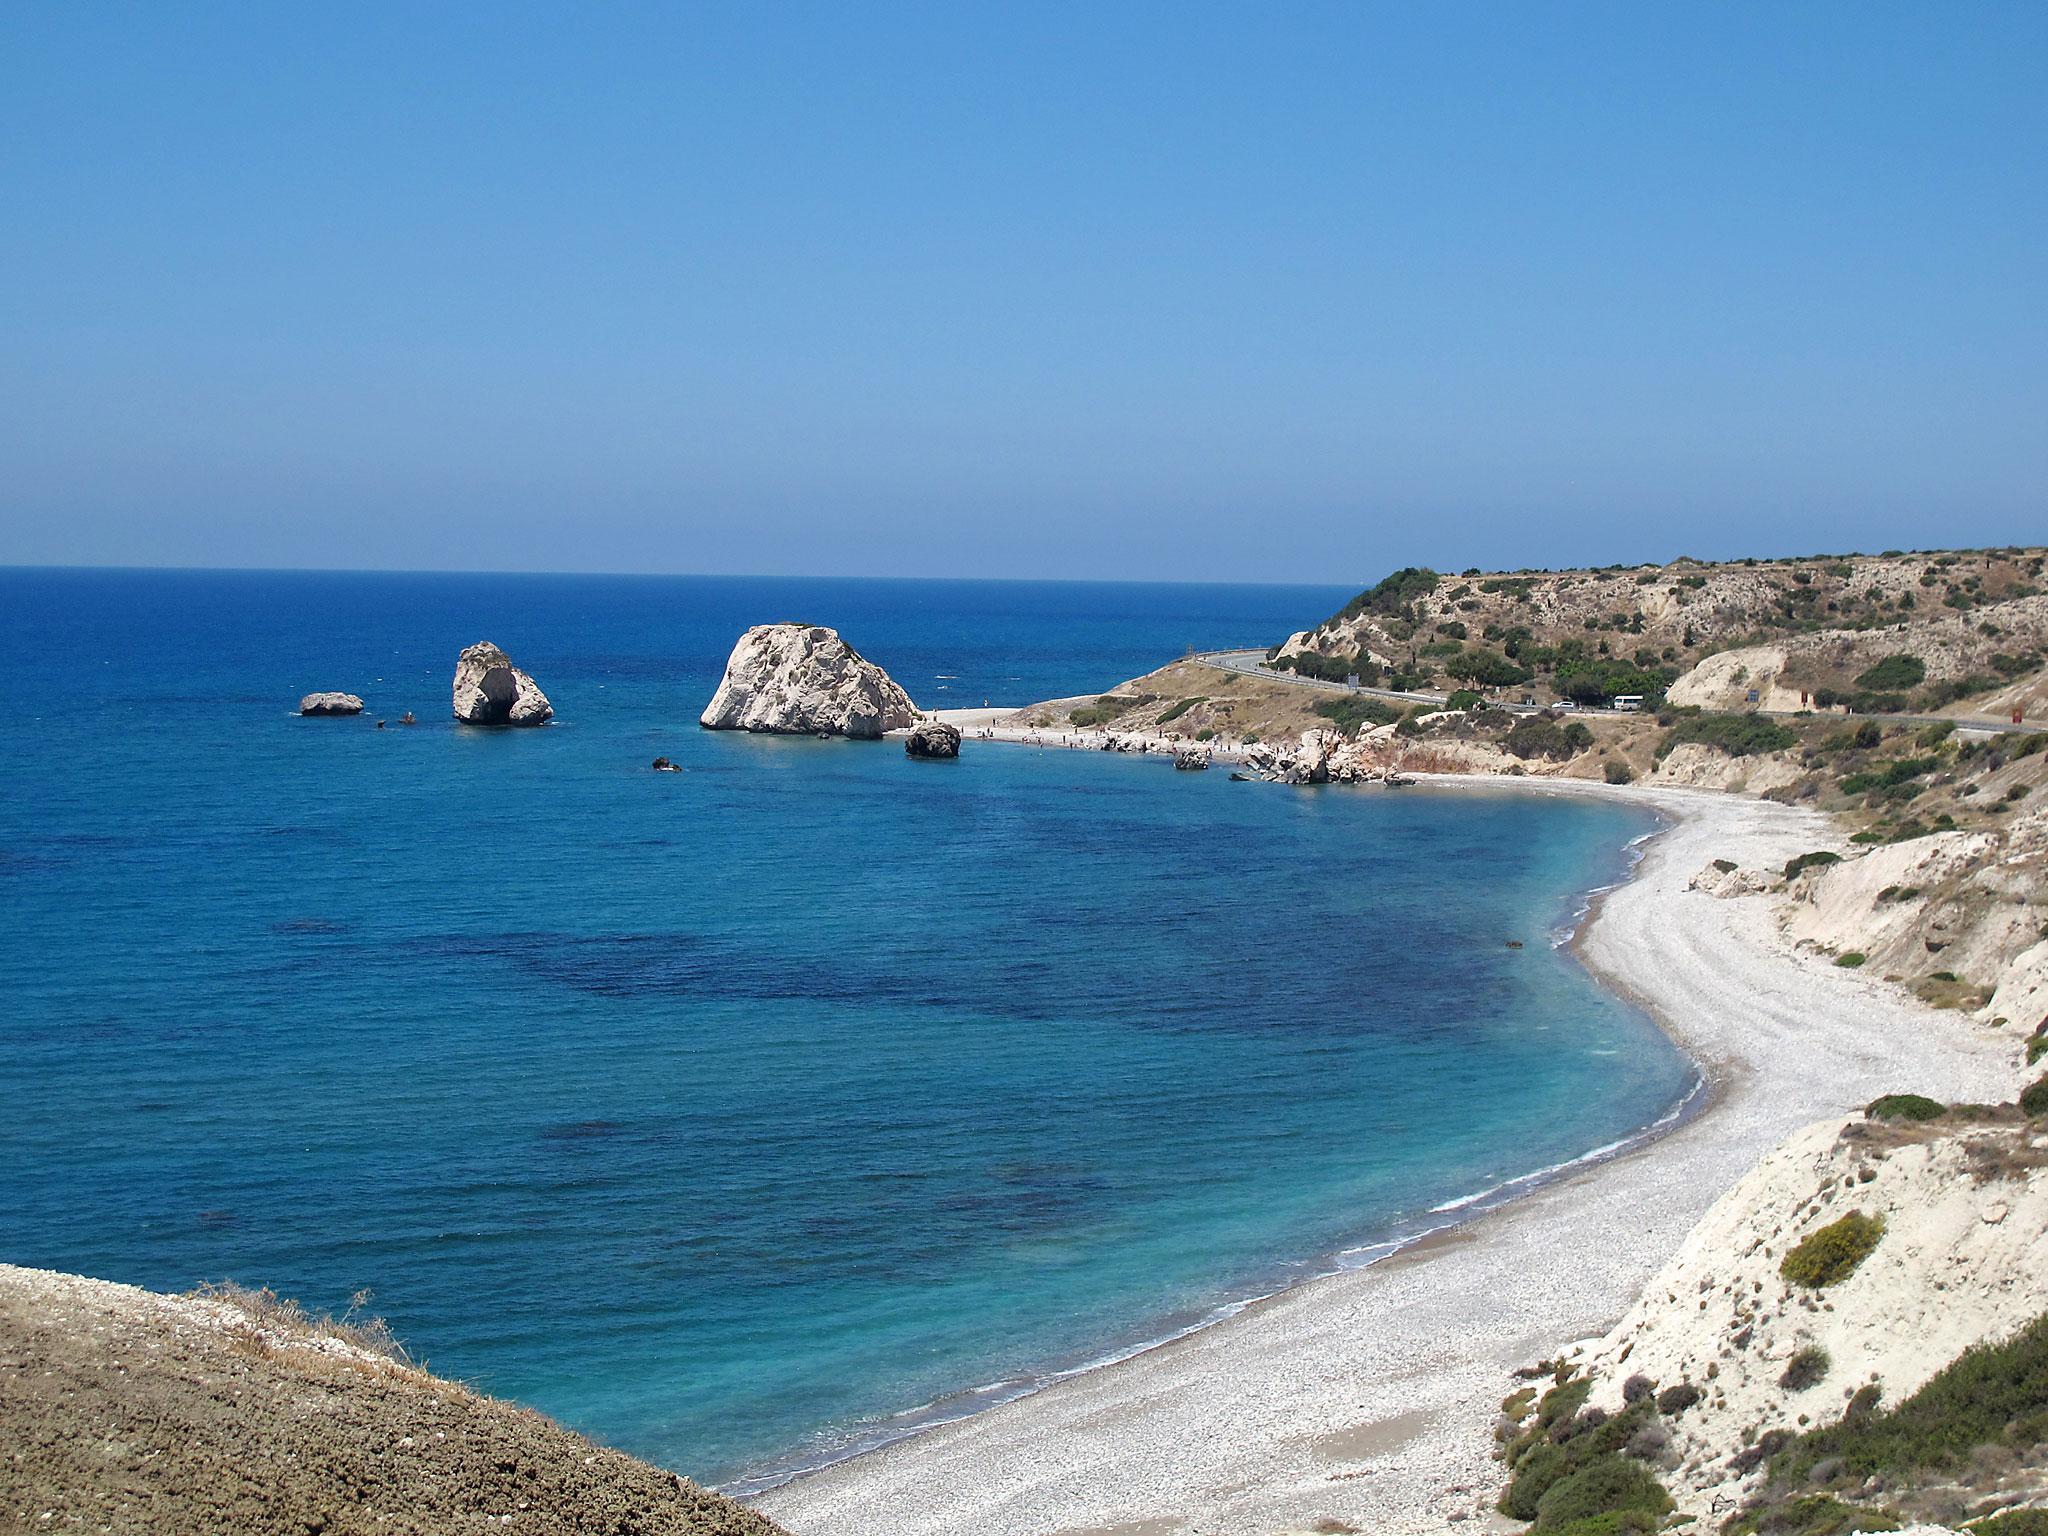 The Petra Tou Romiou (Aphrodite's Rock) in the southwestern Paphos region in the east Mediterranean island of Cyprus Getty